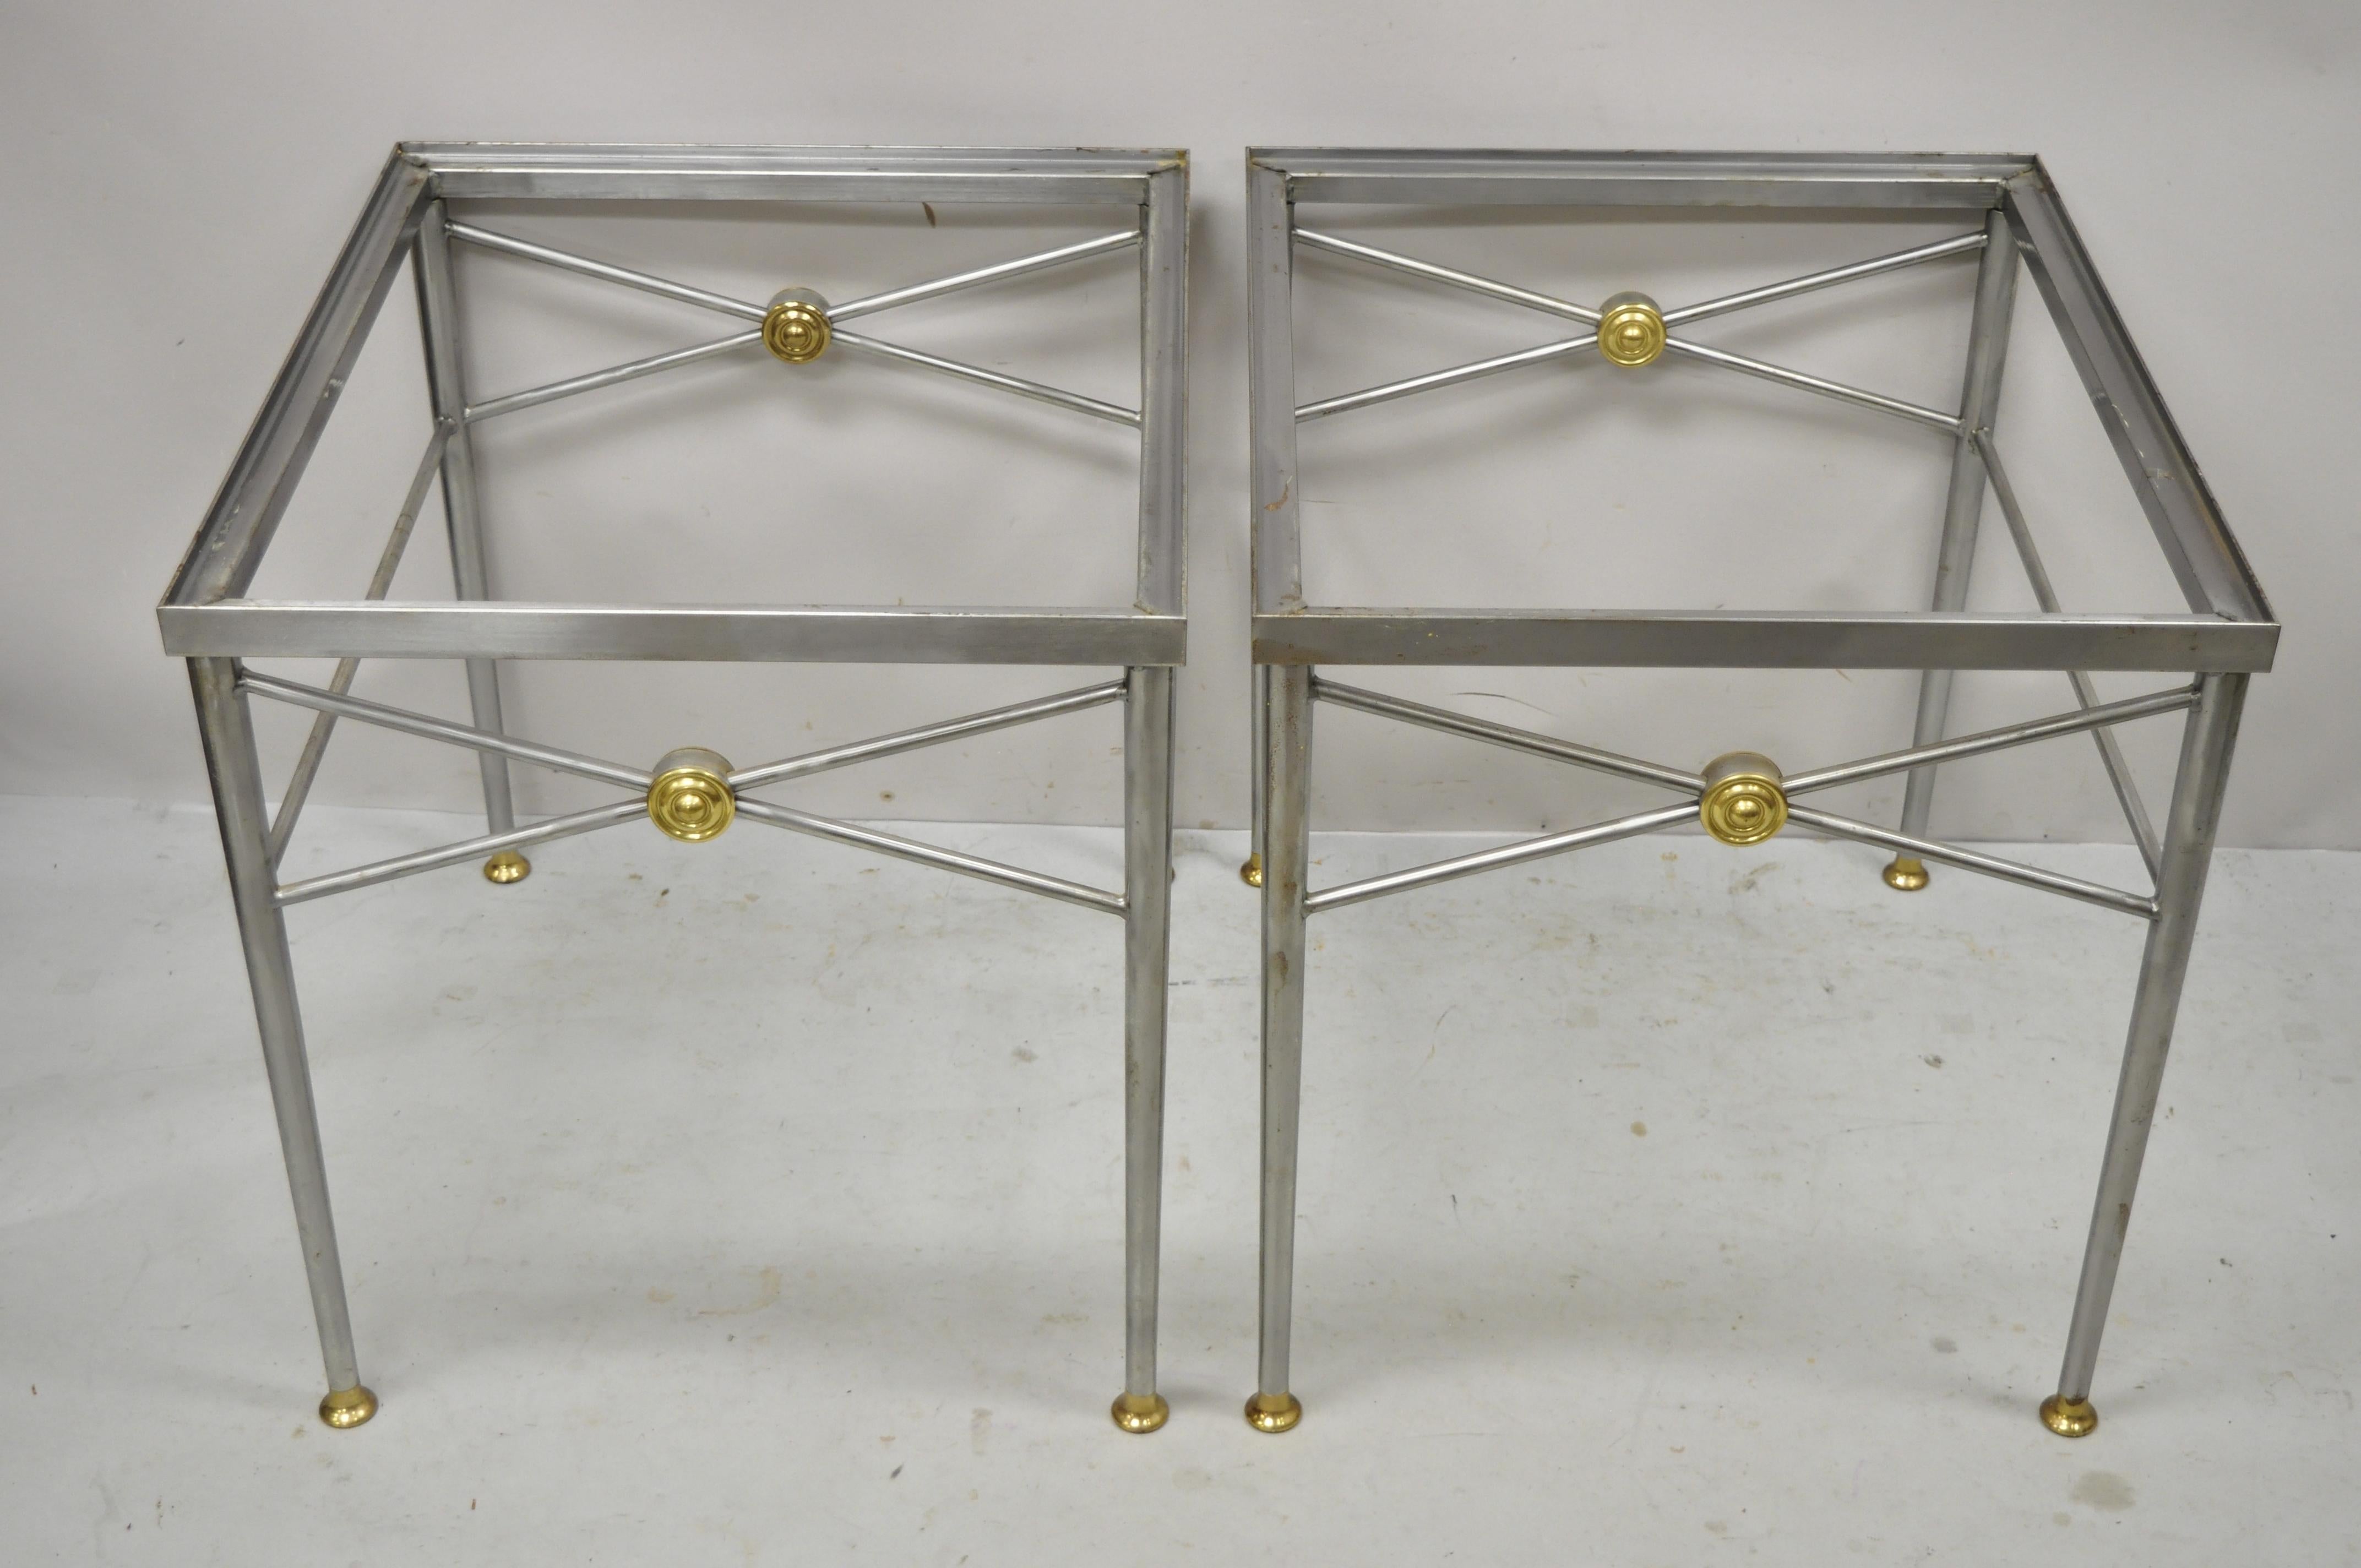 Italian Directoire Maison Jansen style brushed steel & brass end tables - a pair. Item features brushed steel metal frames, brass accents, intentional 